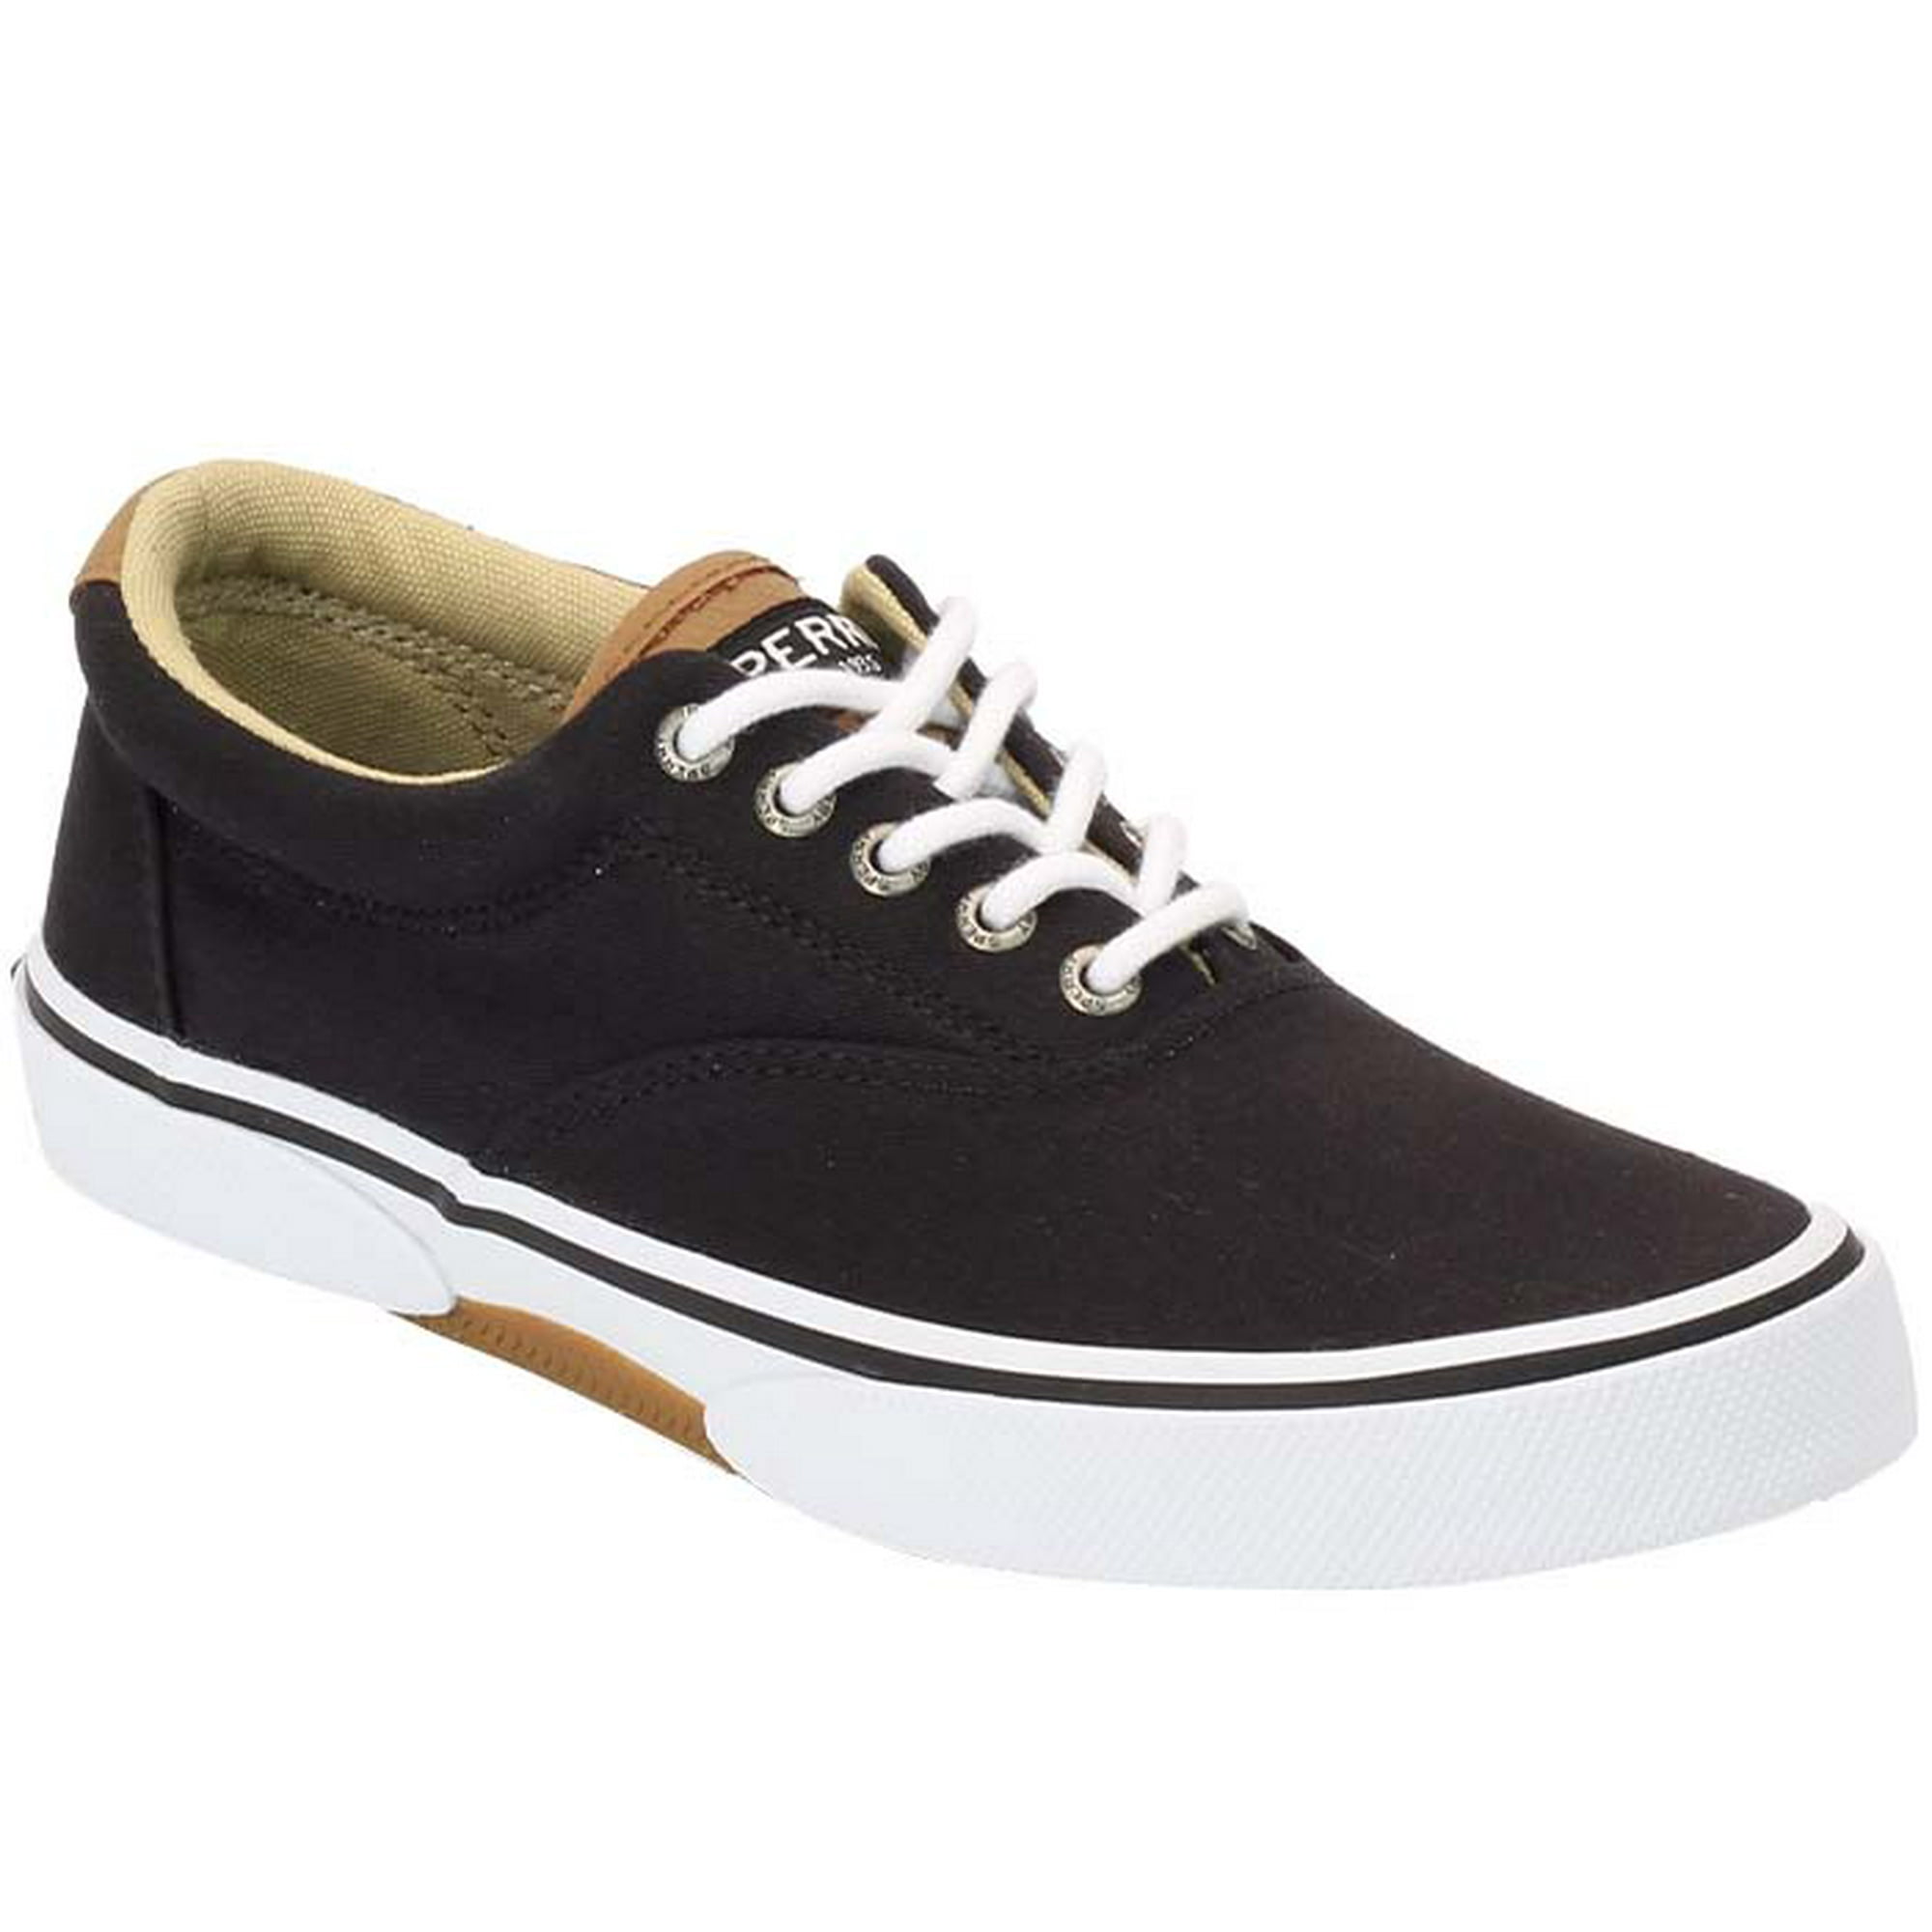 Tenis SPERRY Para Hombre Casuales Color Negro Modelo STS12811